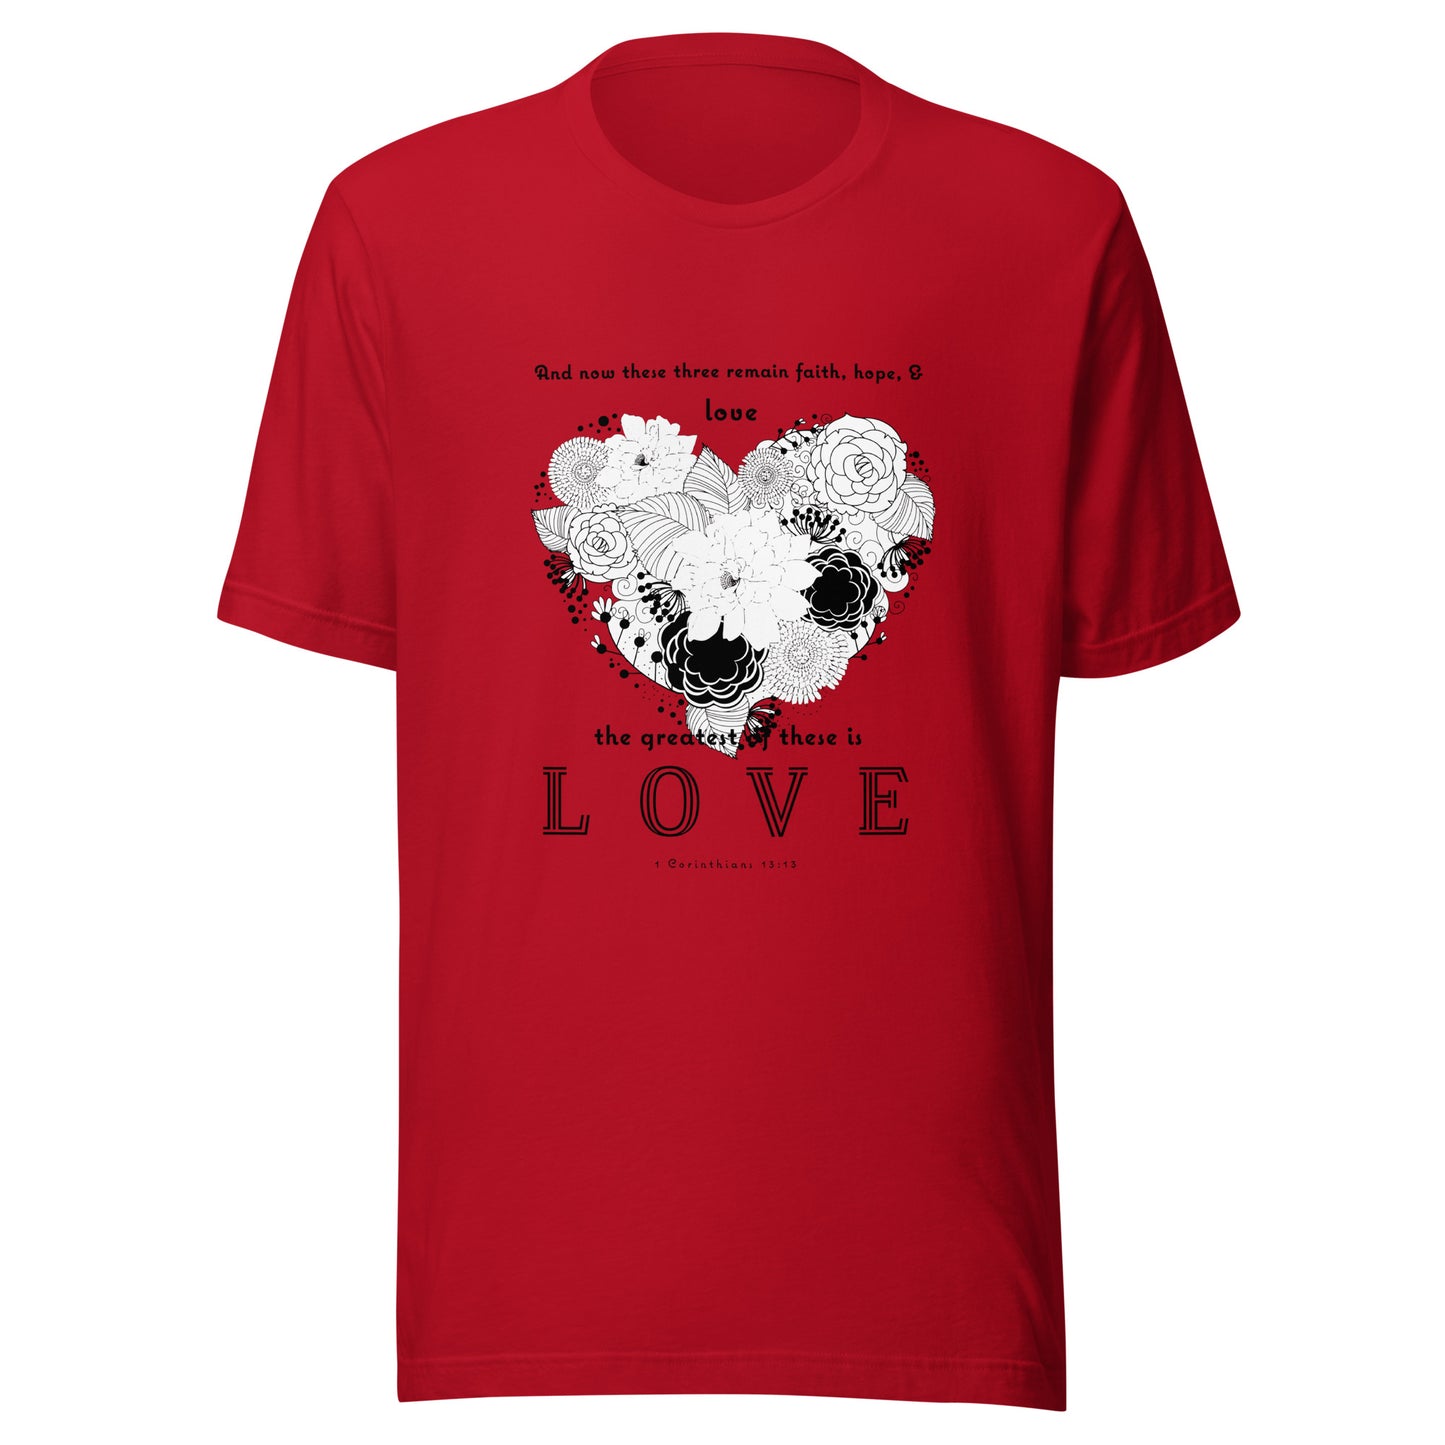 1 Corinthians 13:13 Greatest Love T-Shirt in Red - front view